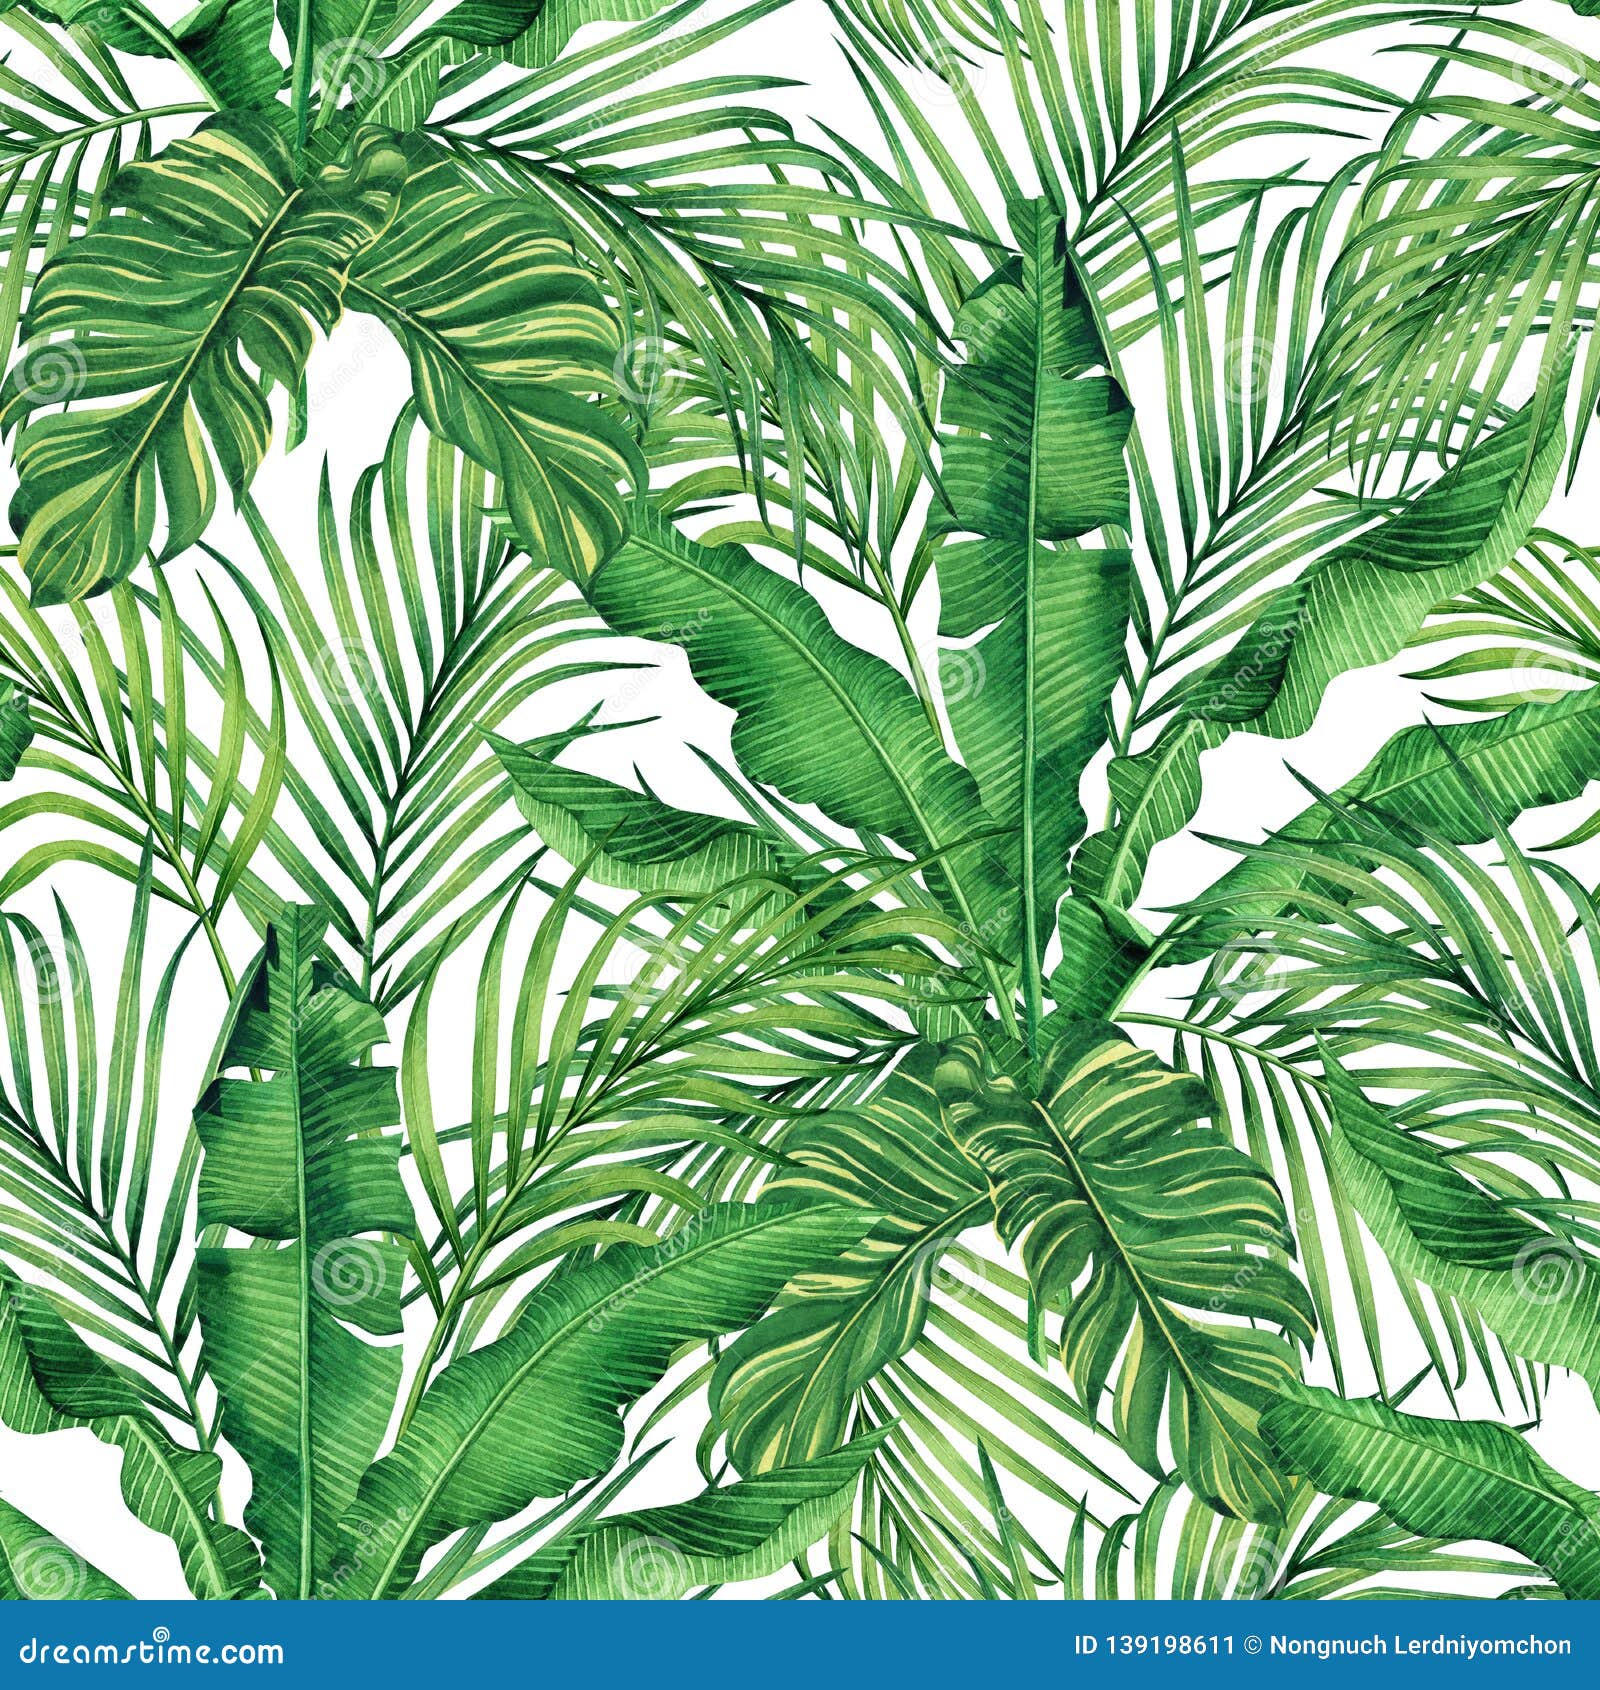 watercolor painting coconut,banana,palm leaf,green leave seamless pattern background.watercolor hand drawn  tropical e